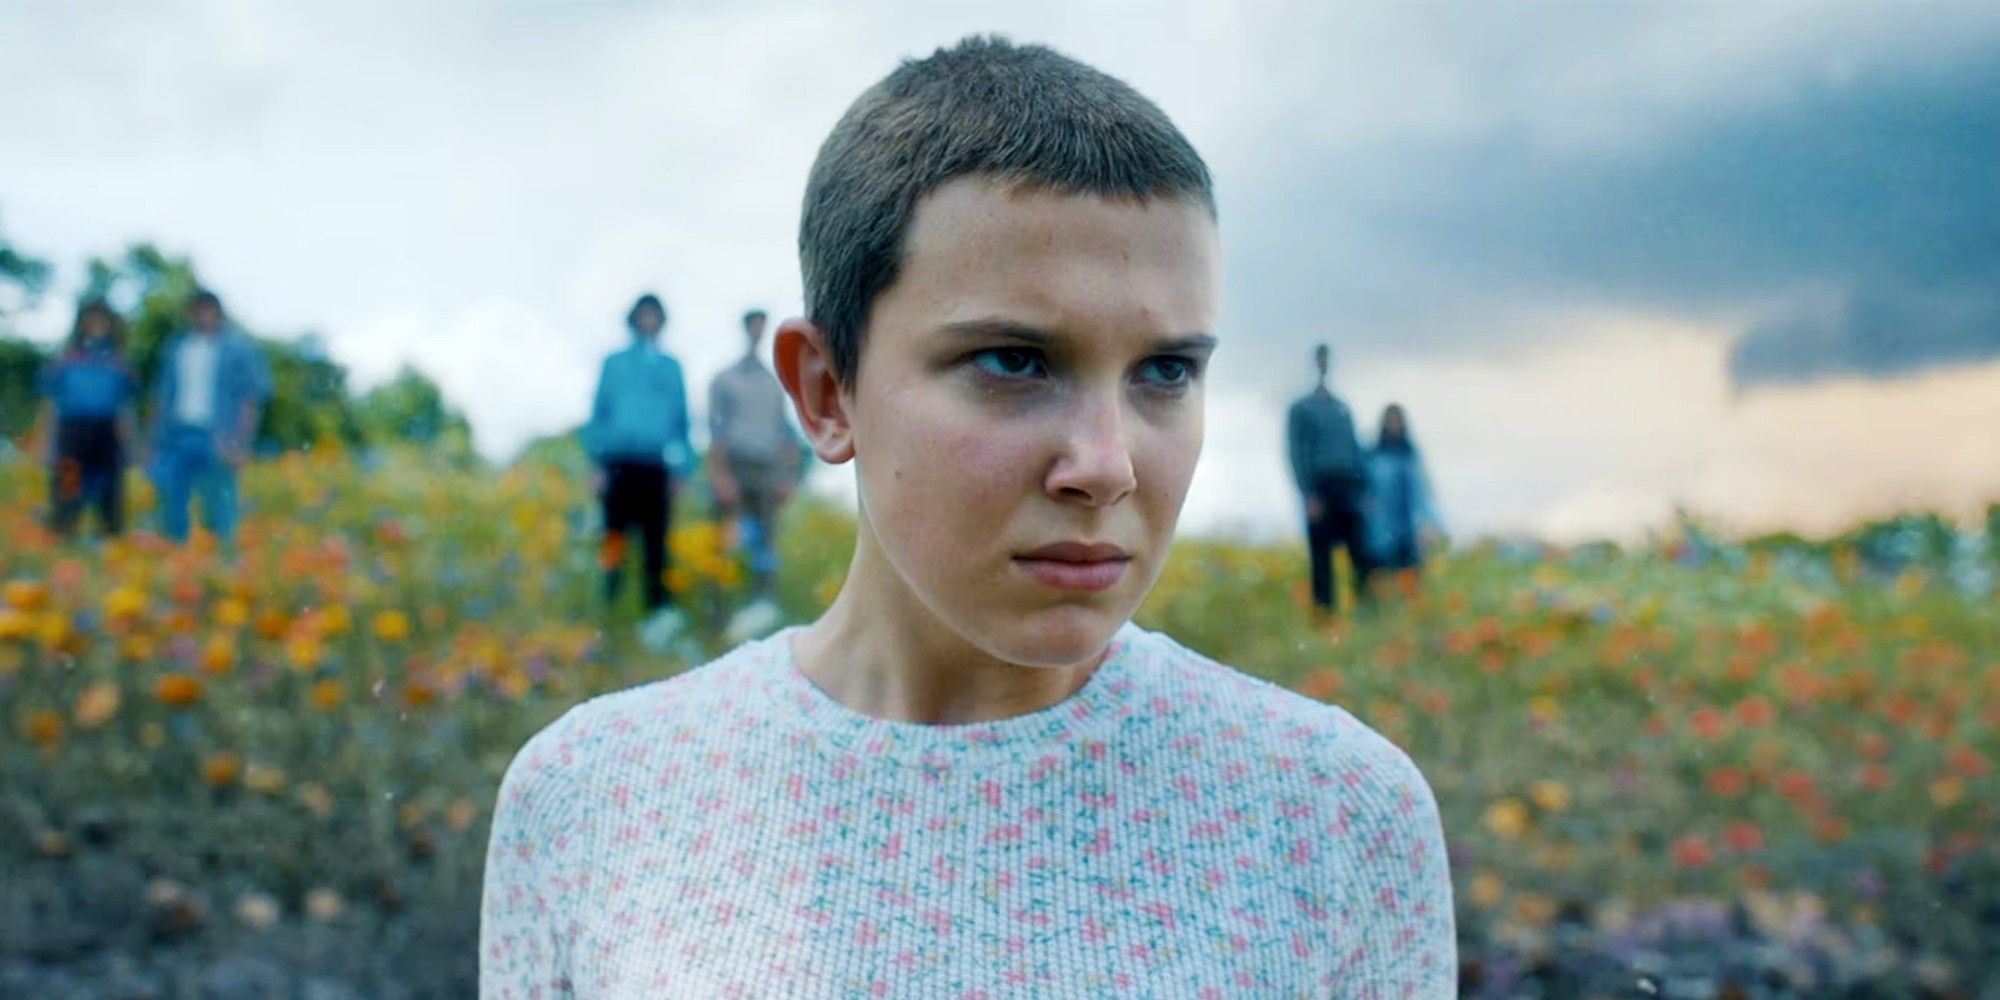 Millie Bobby Brown as Eleven gazes into the distance in Stranger Things 4